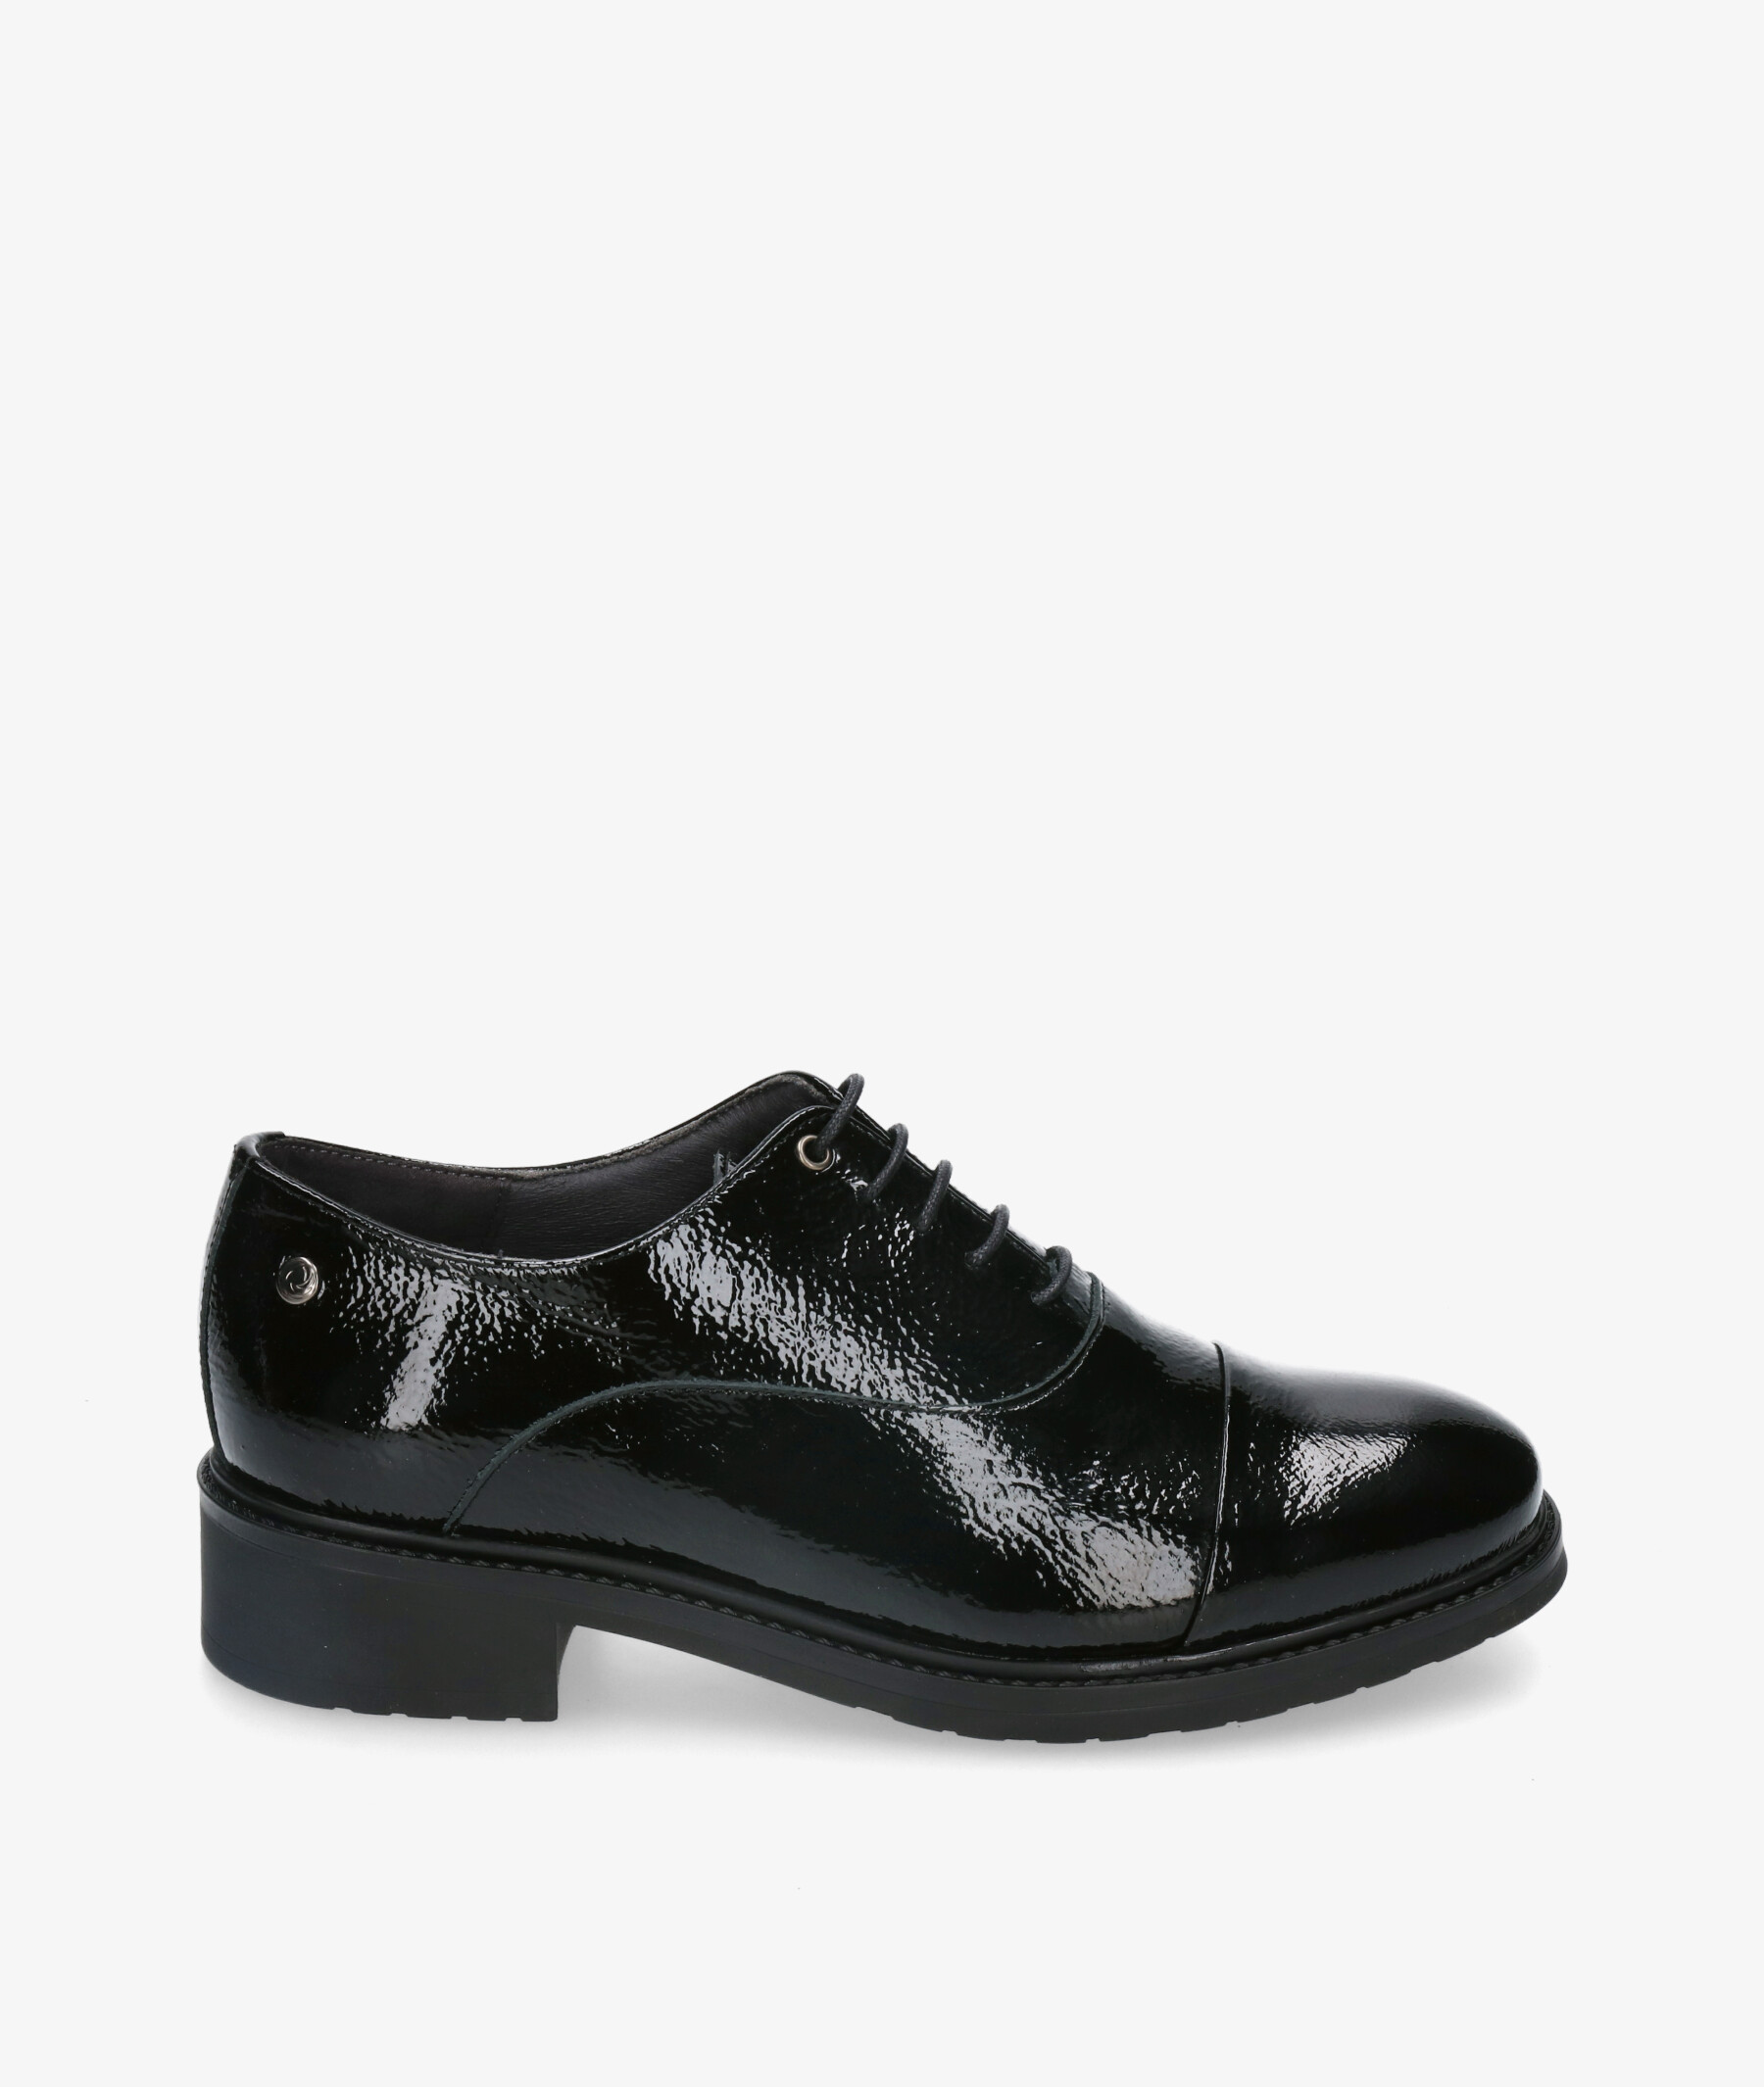 POs - OLA Oxford shoes 7159 in black patent leather